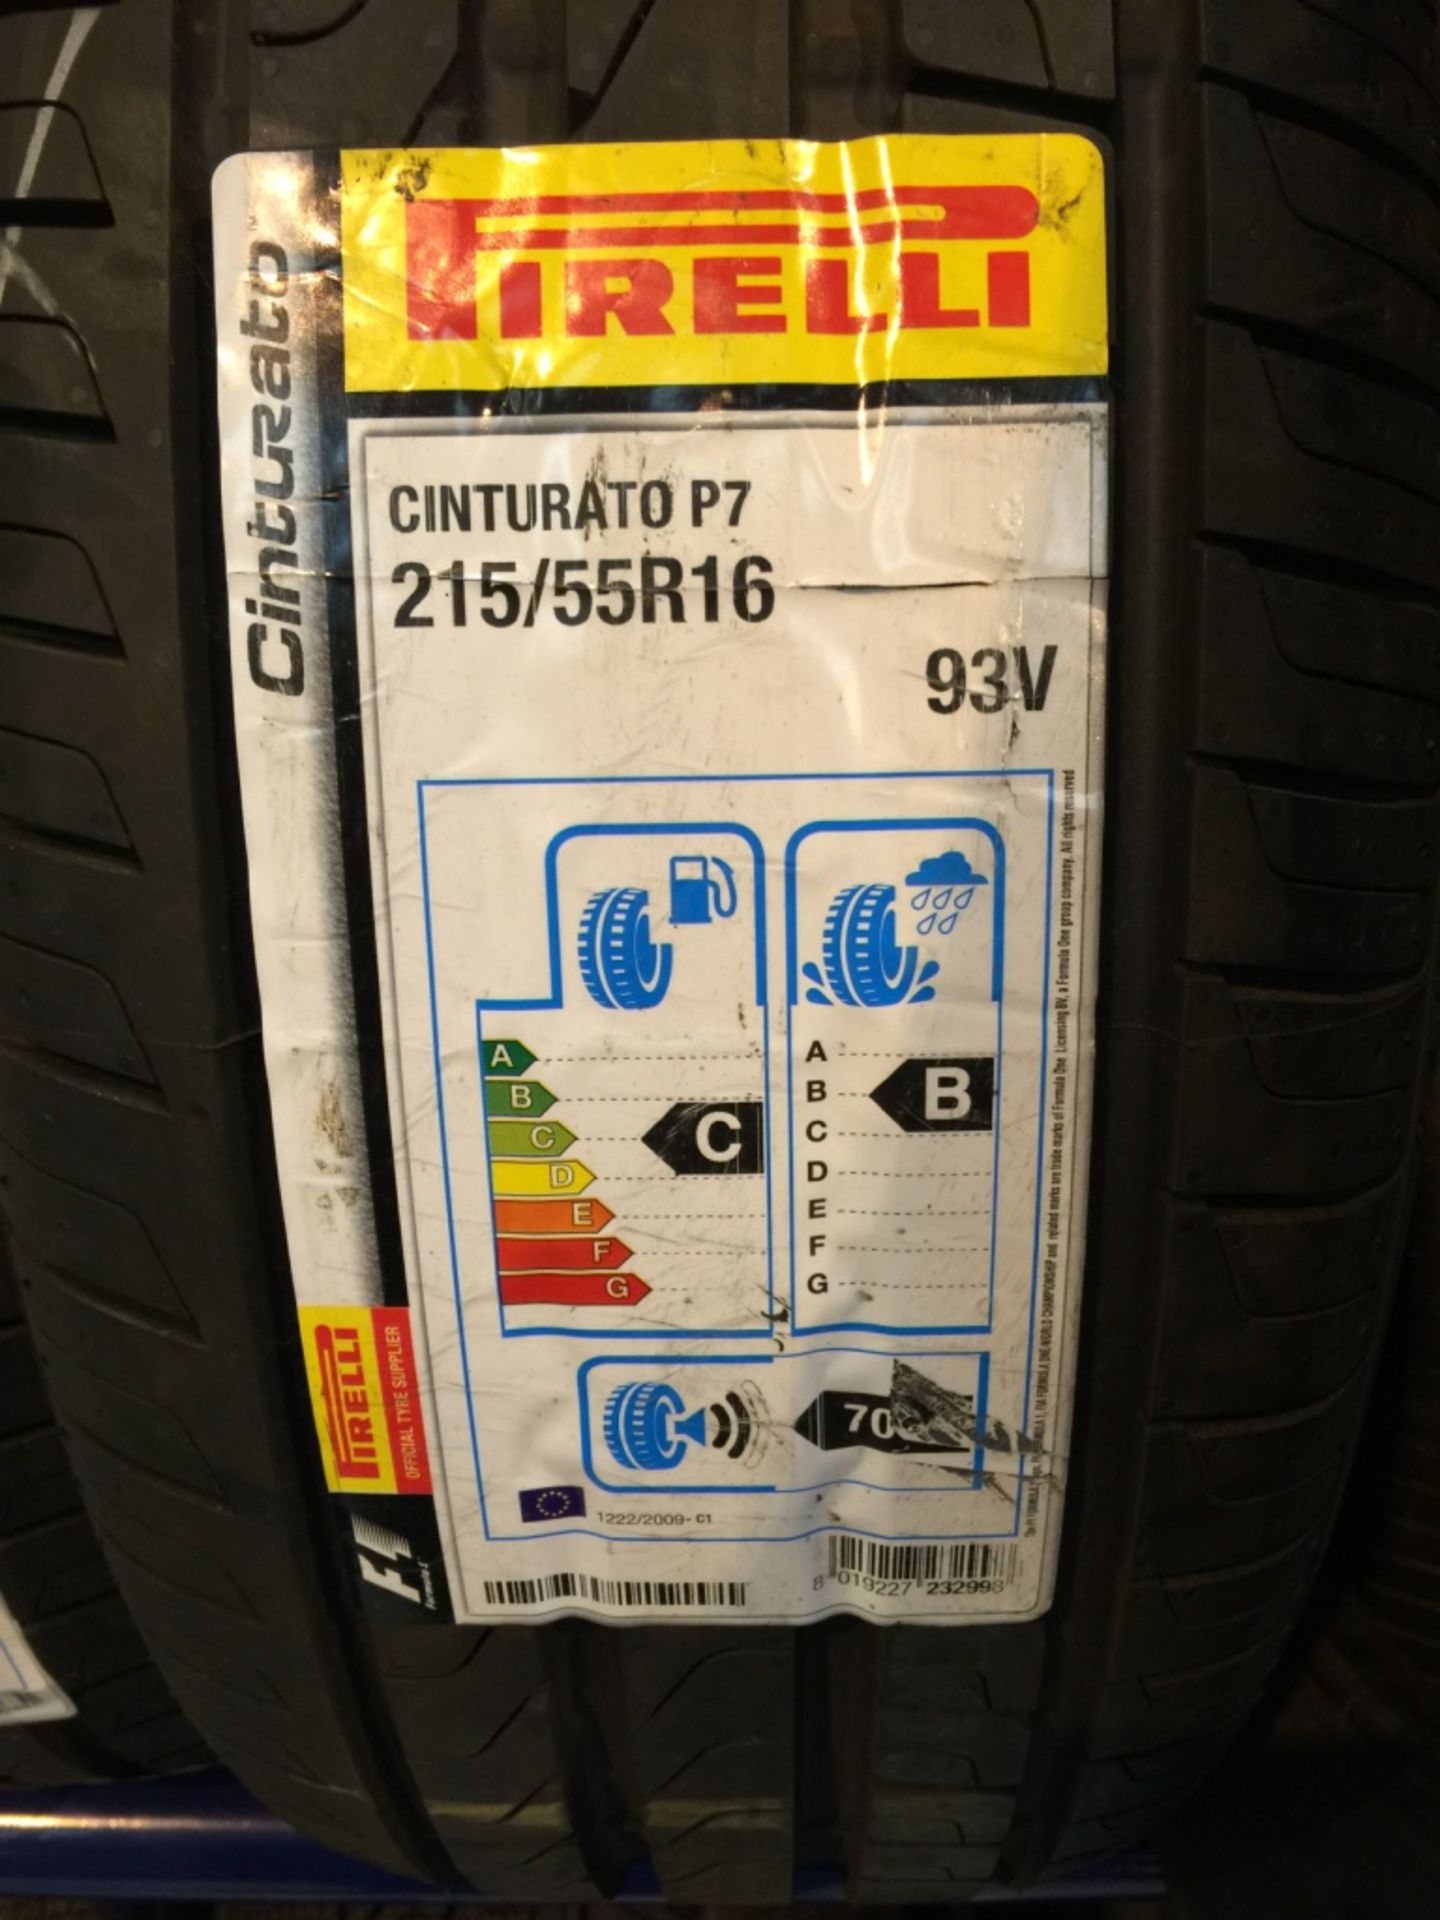 54: Pirelli Tyres Car & 4X4 - Many Large Sizes to include 18,19,21" Please see further Pictures ( - Image 31 of 55